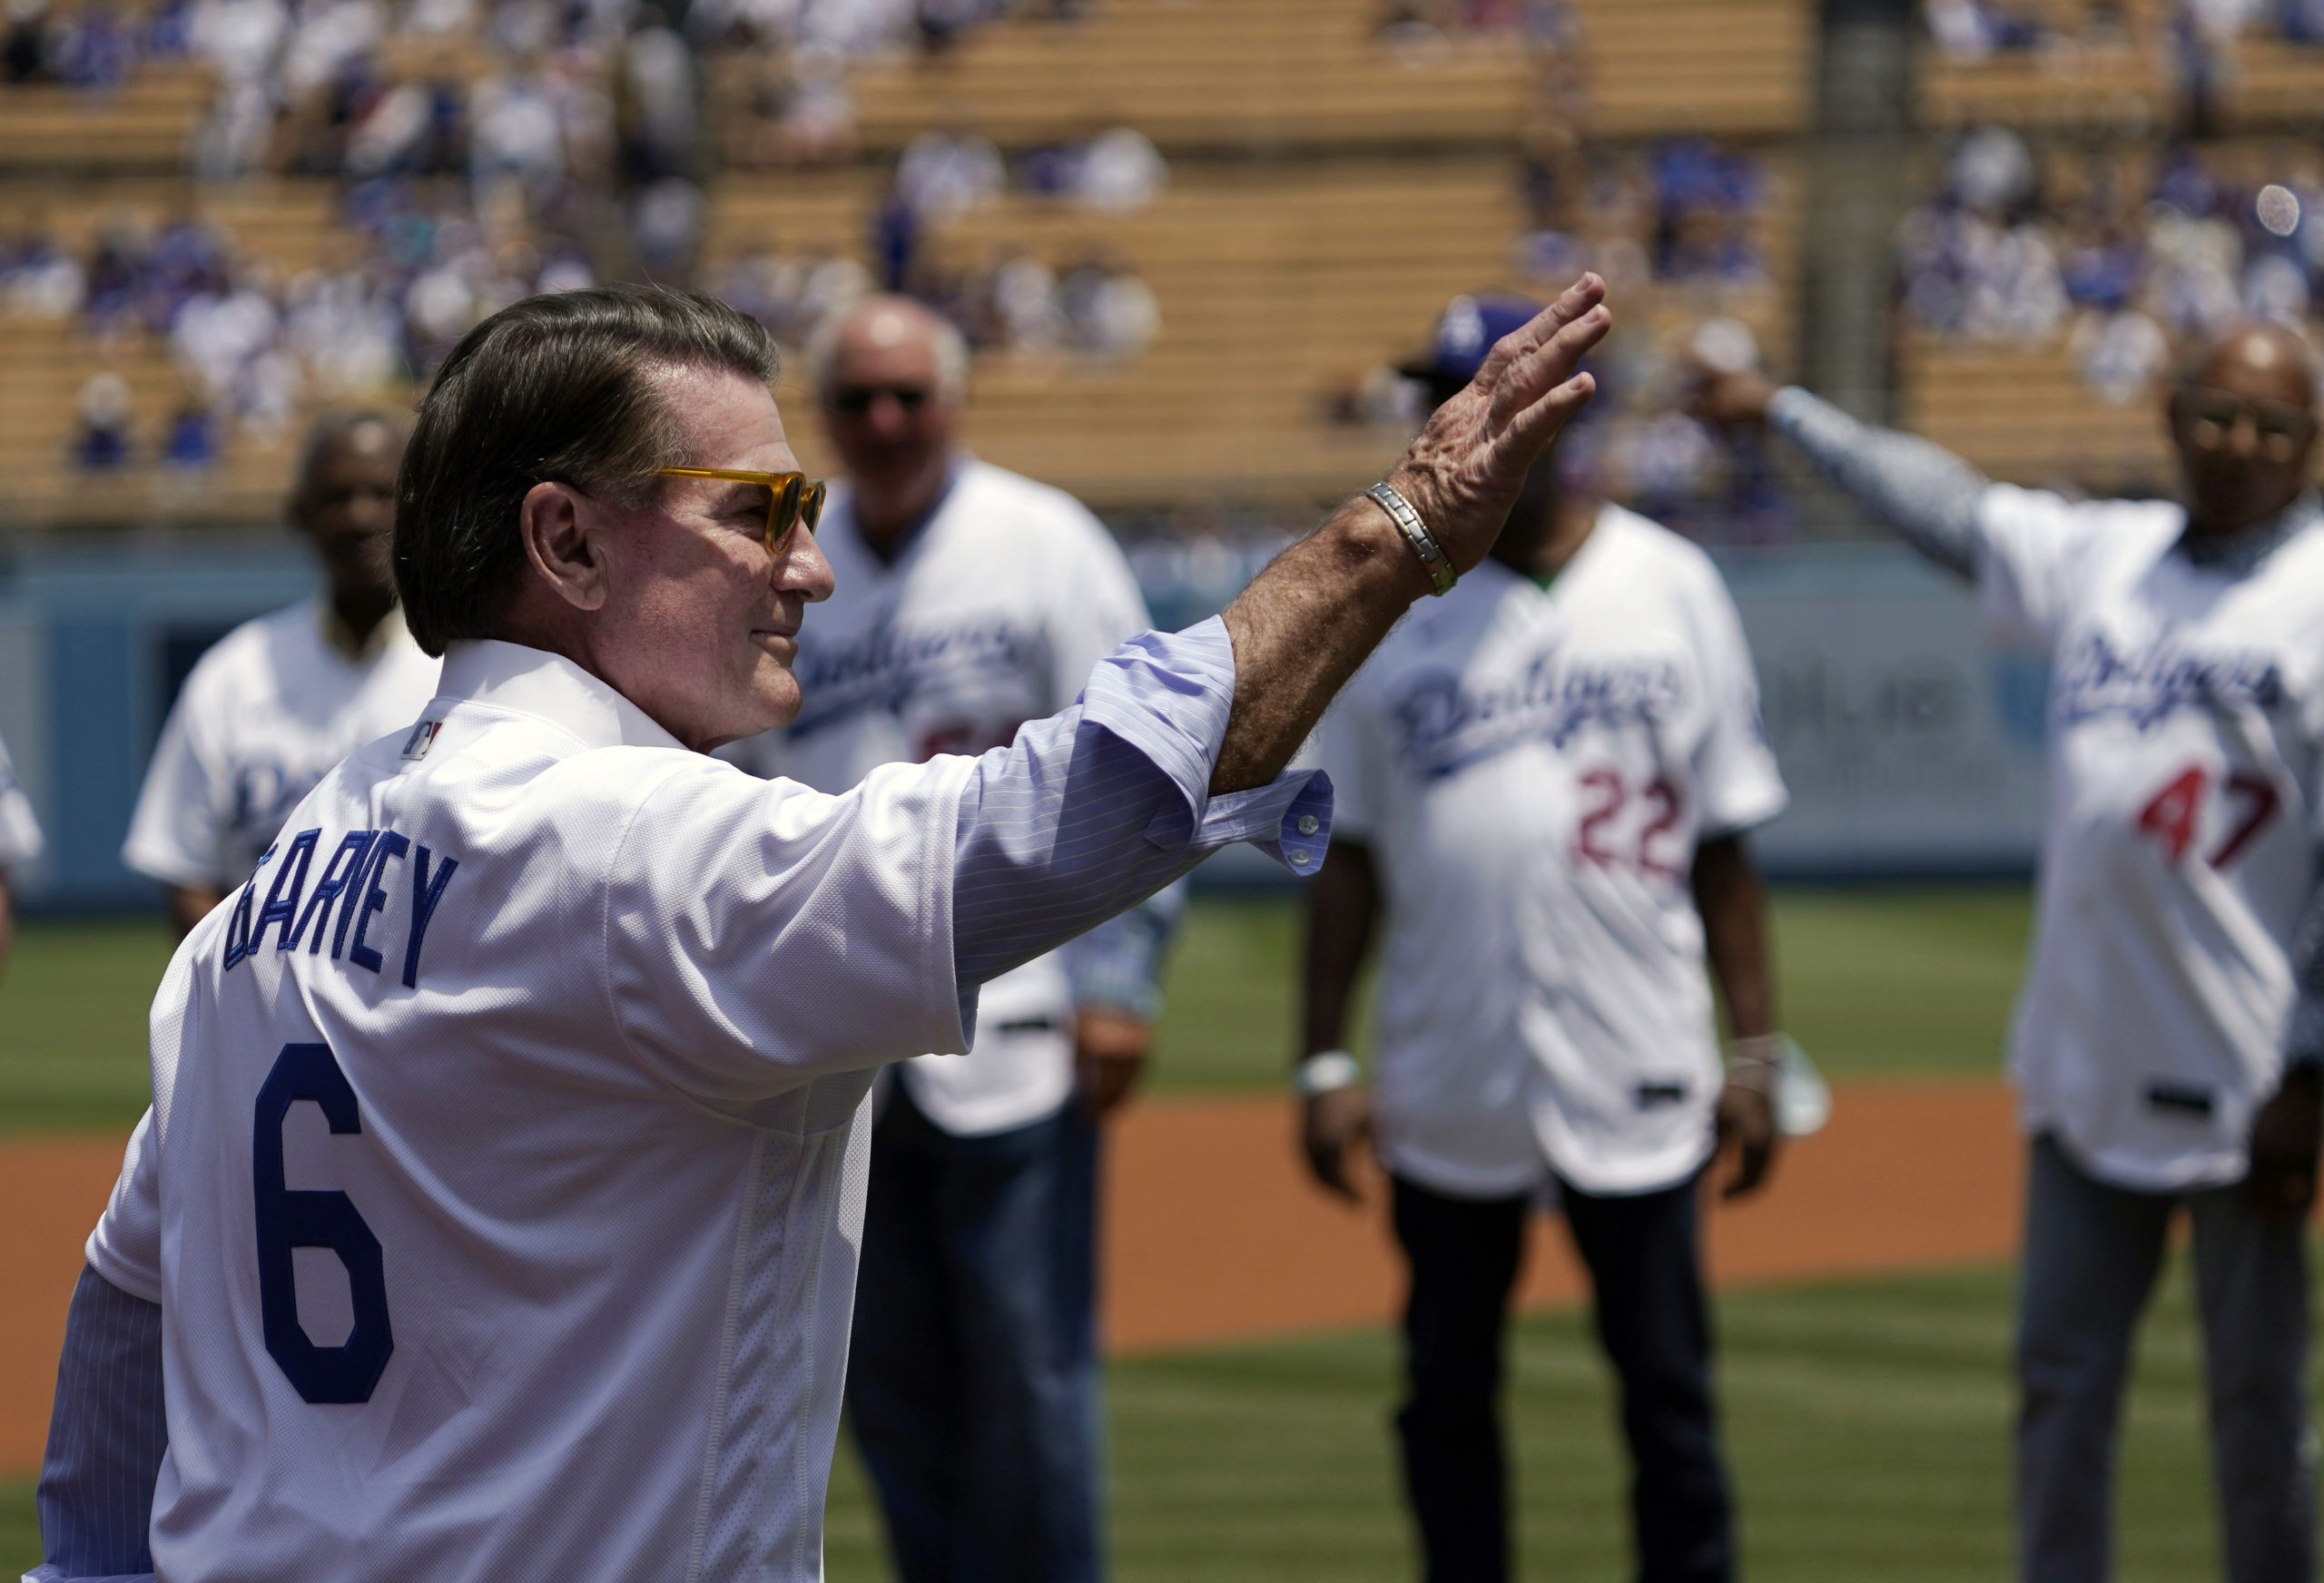 Steve Garvey, former Los Angeles Dodgers player, waves to fans before a game between the Dodgers and the Colorado Rockies in Los Angeles, California, on July 25, 2021. On Tuesday, Garvey announced he was running for a California Senate seat as a Republican.